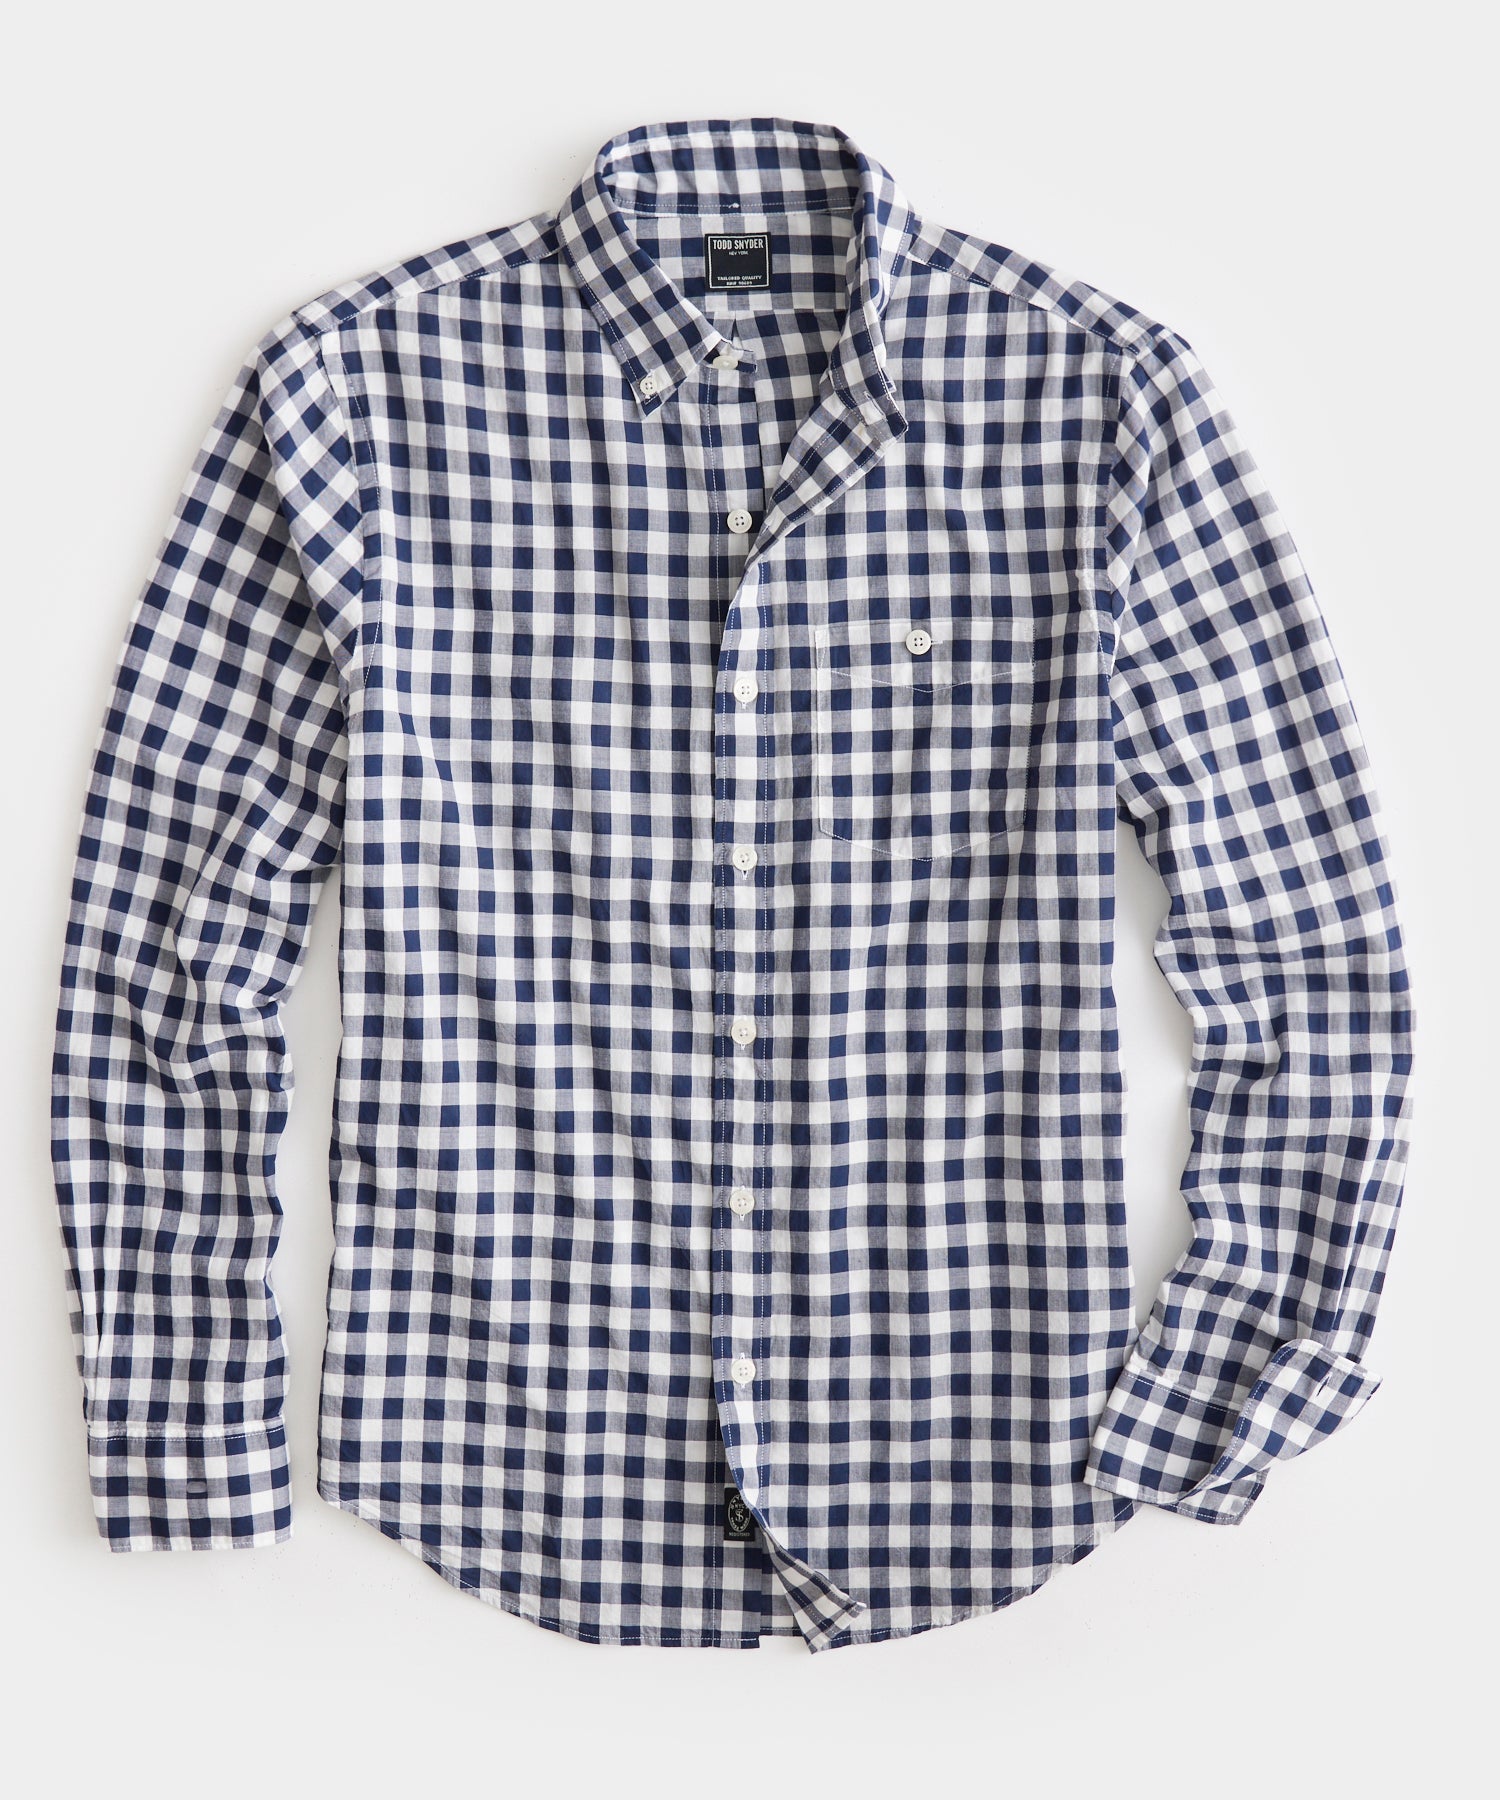 Todd Snyder - TODD SNYDER SUMMER WEIGHT FAVORITE SHIRT IN BLUE GINGHAM - Rent With Thred